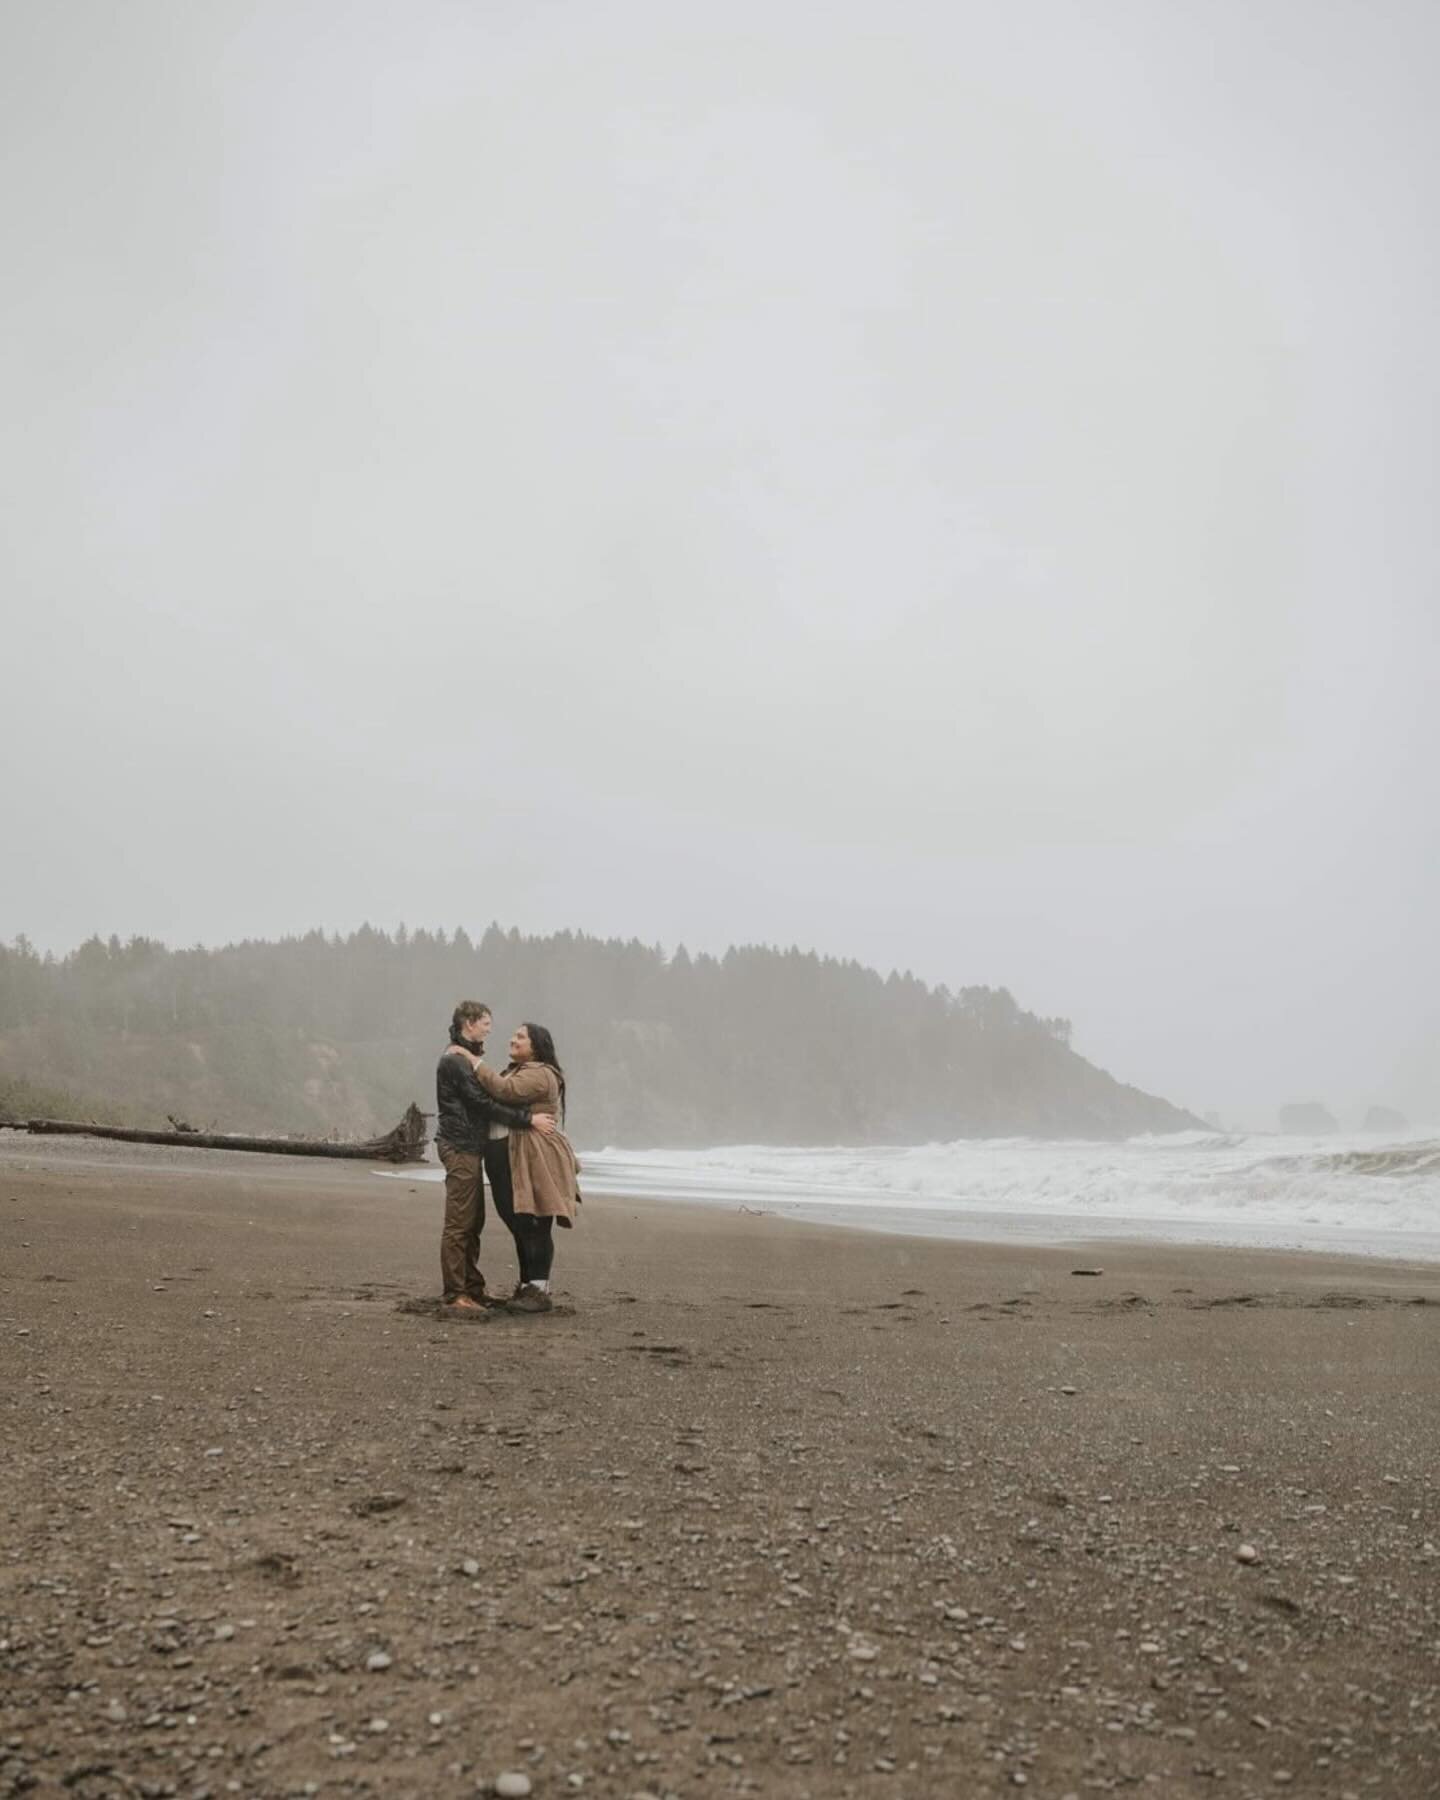 Rainy proposal season! You never know what weather you might get but I am always down for an adventure!